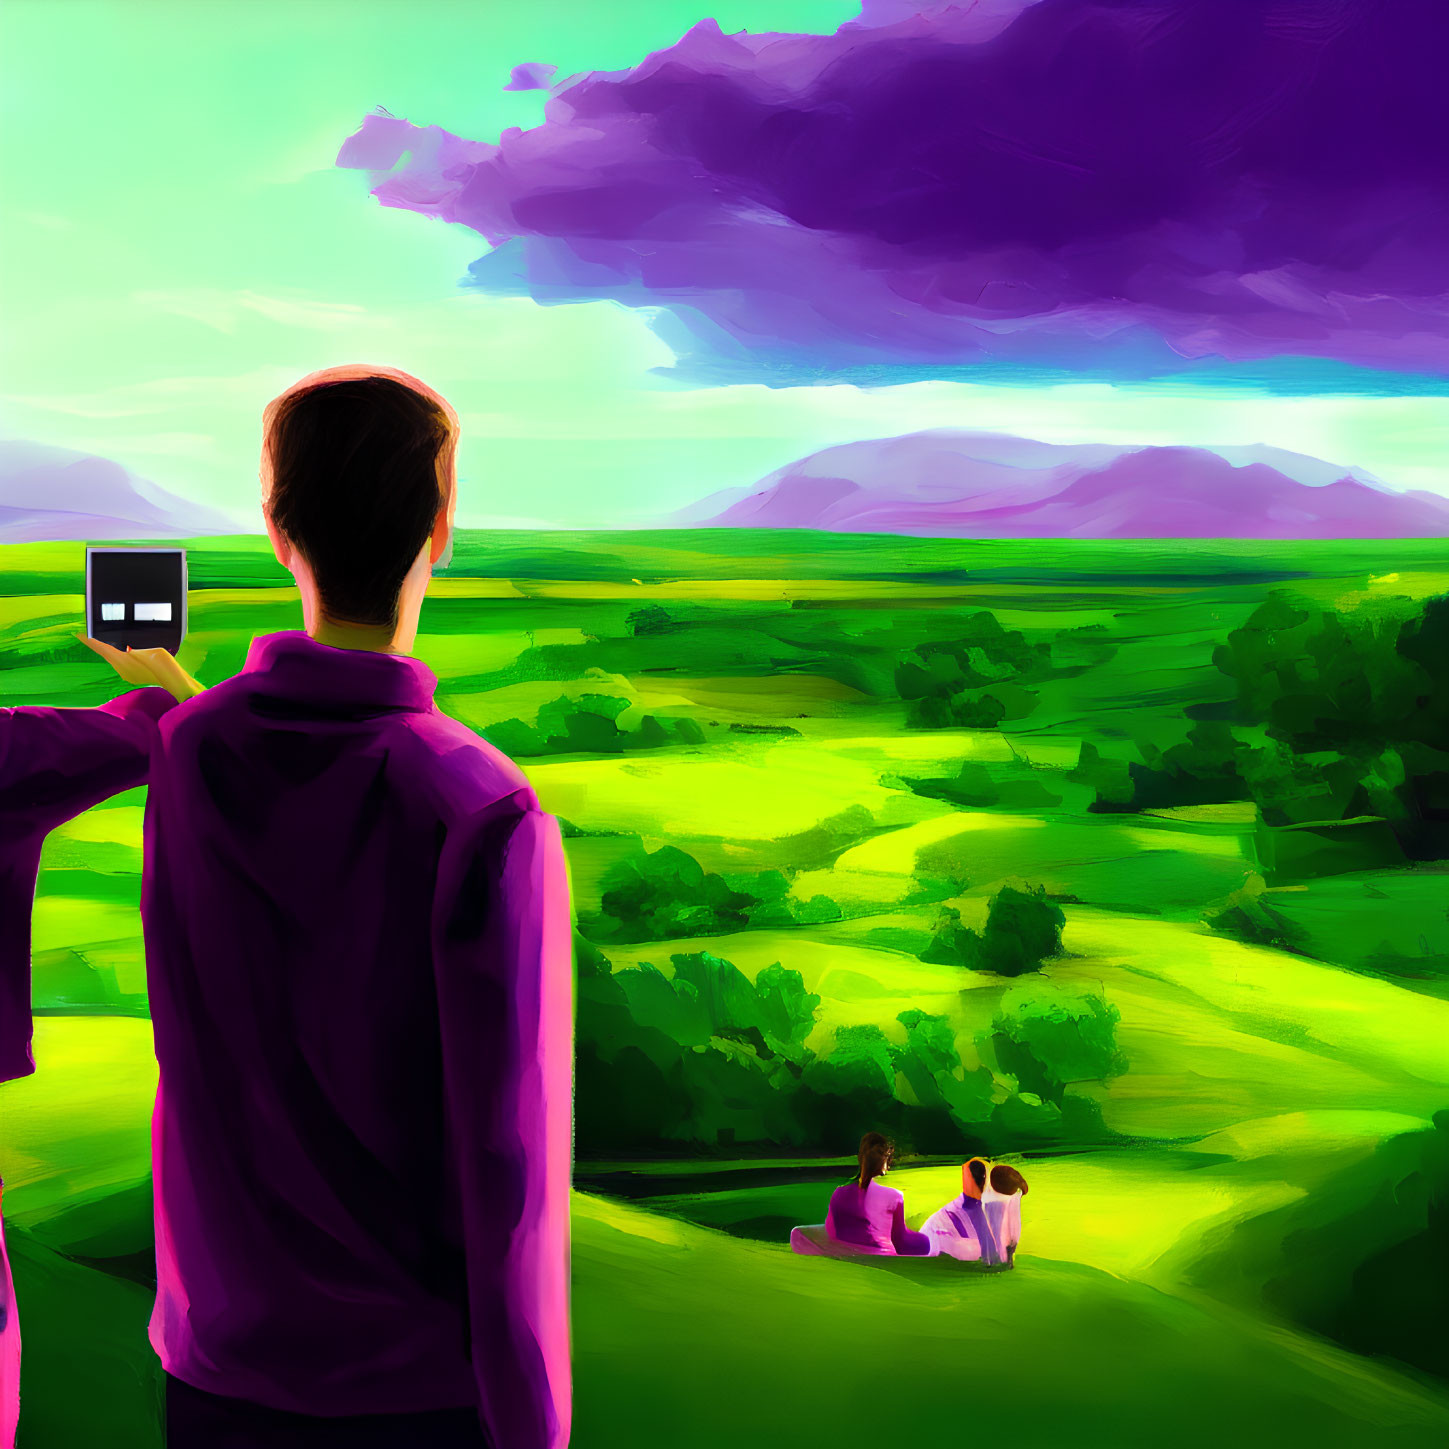 Purple-shirted person captures lush green landscape with distant mountains; two people relax on grass.